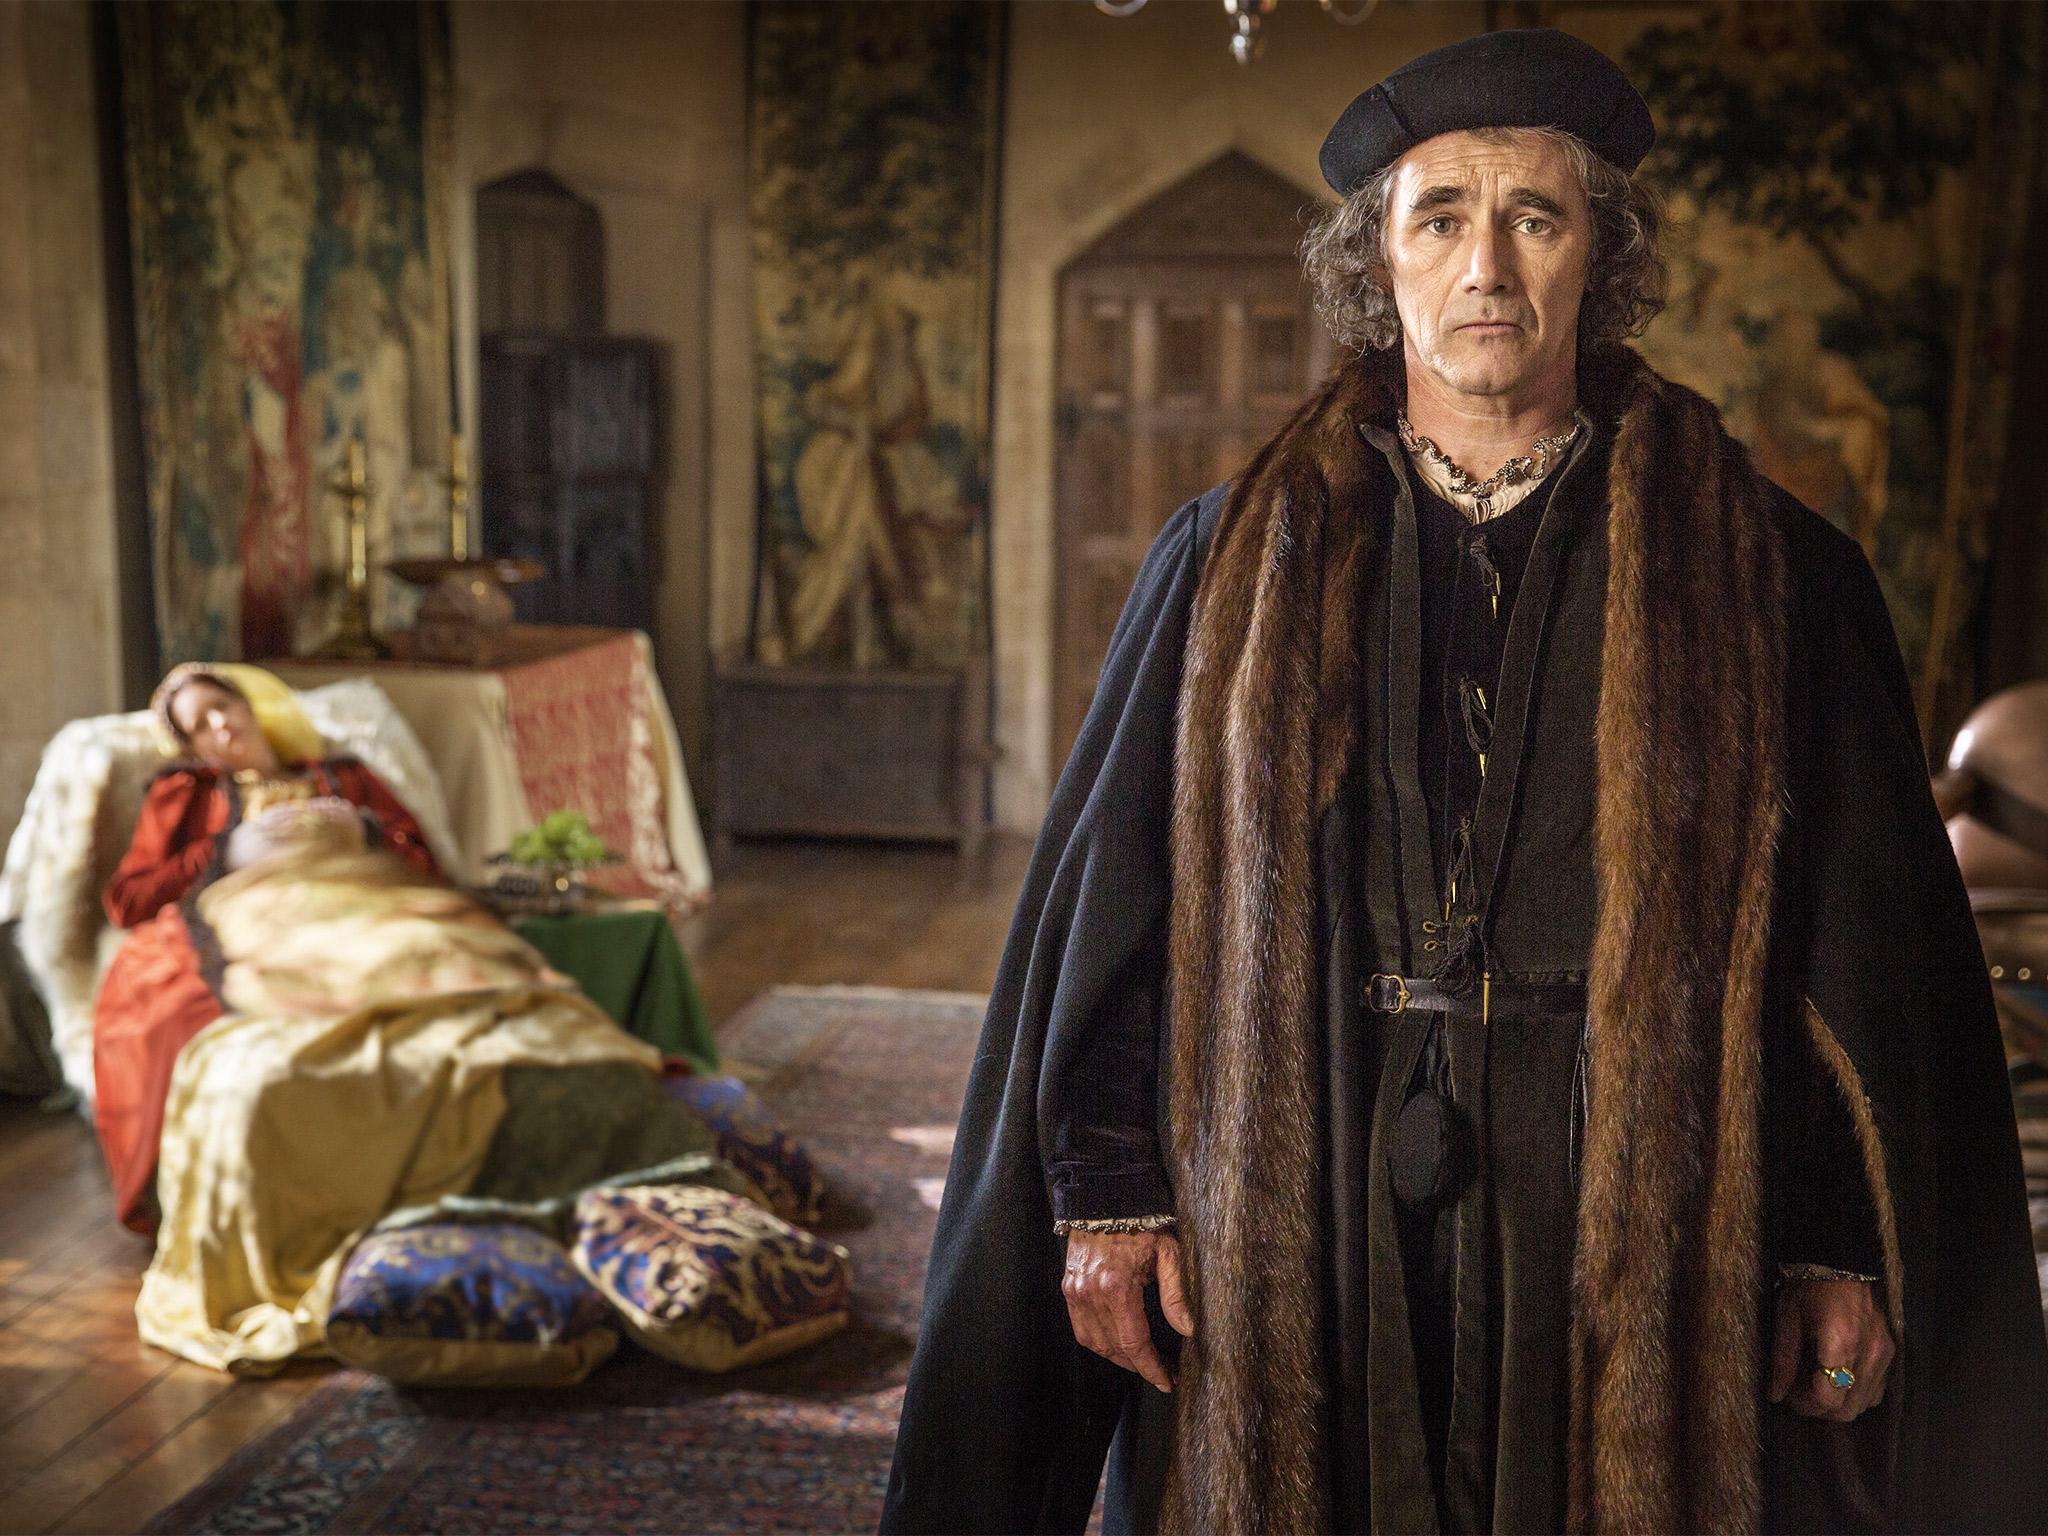 Wolf Hall star Mark Rylance was one of the actors opposed to the original proposals